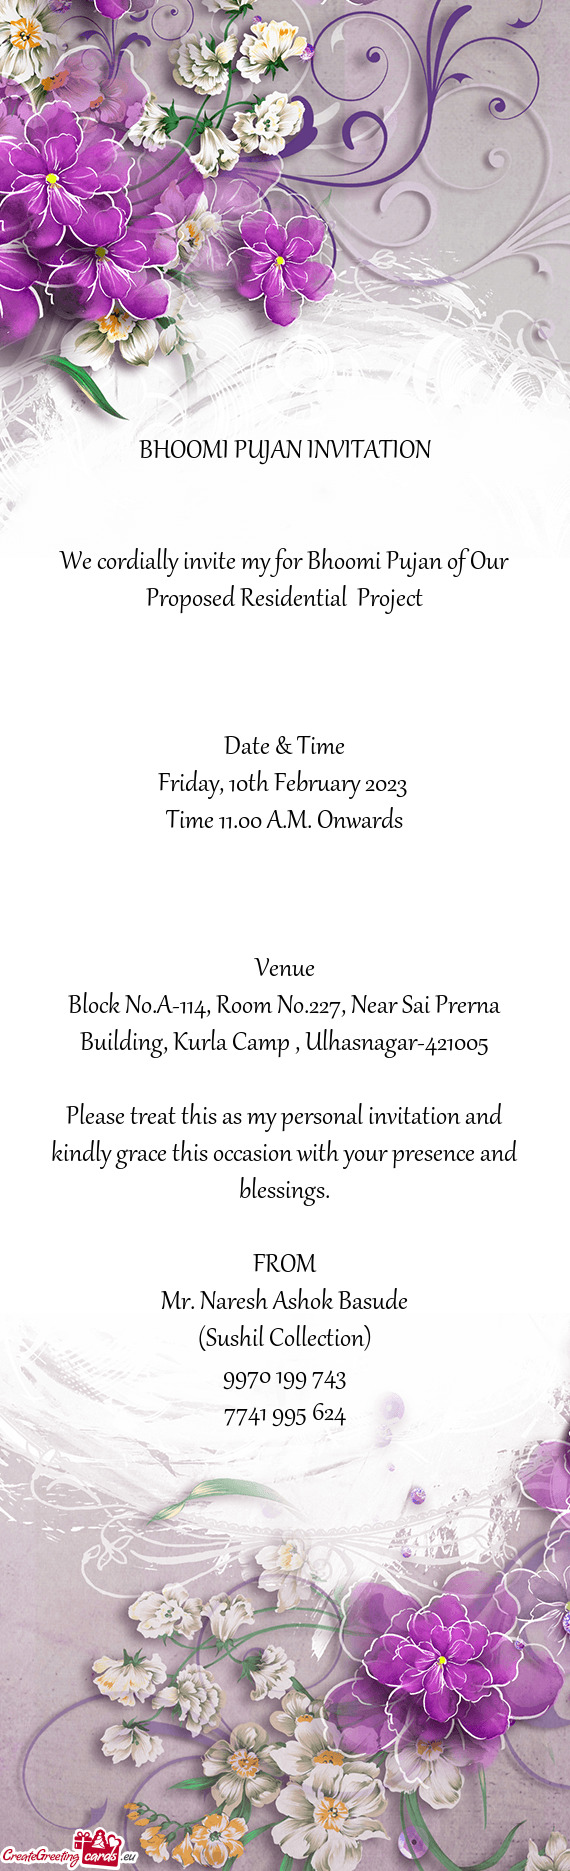 We cordially invite my for Bhoomi Pujan of Our Proposed Residential Project